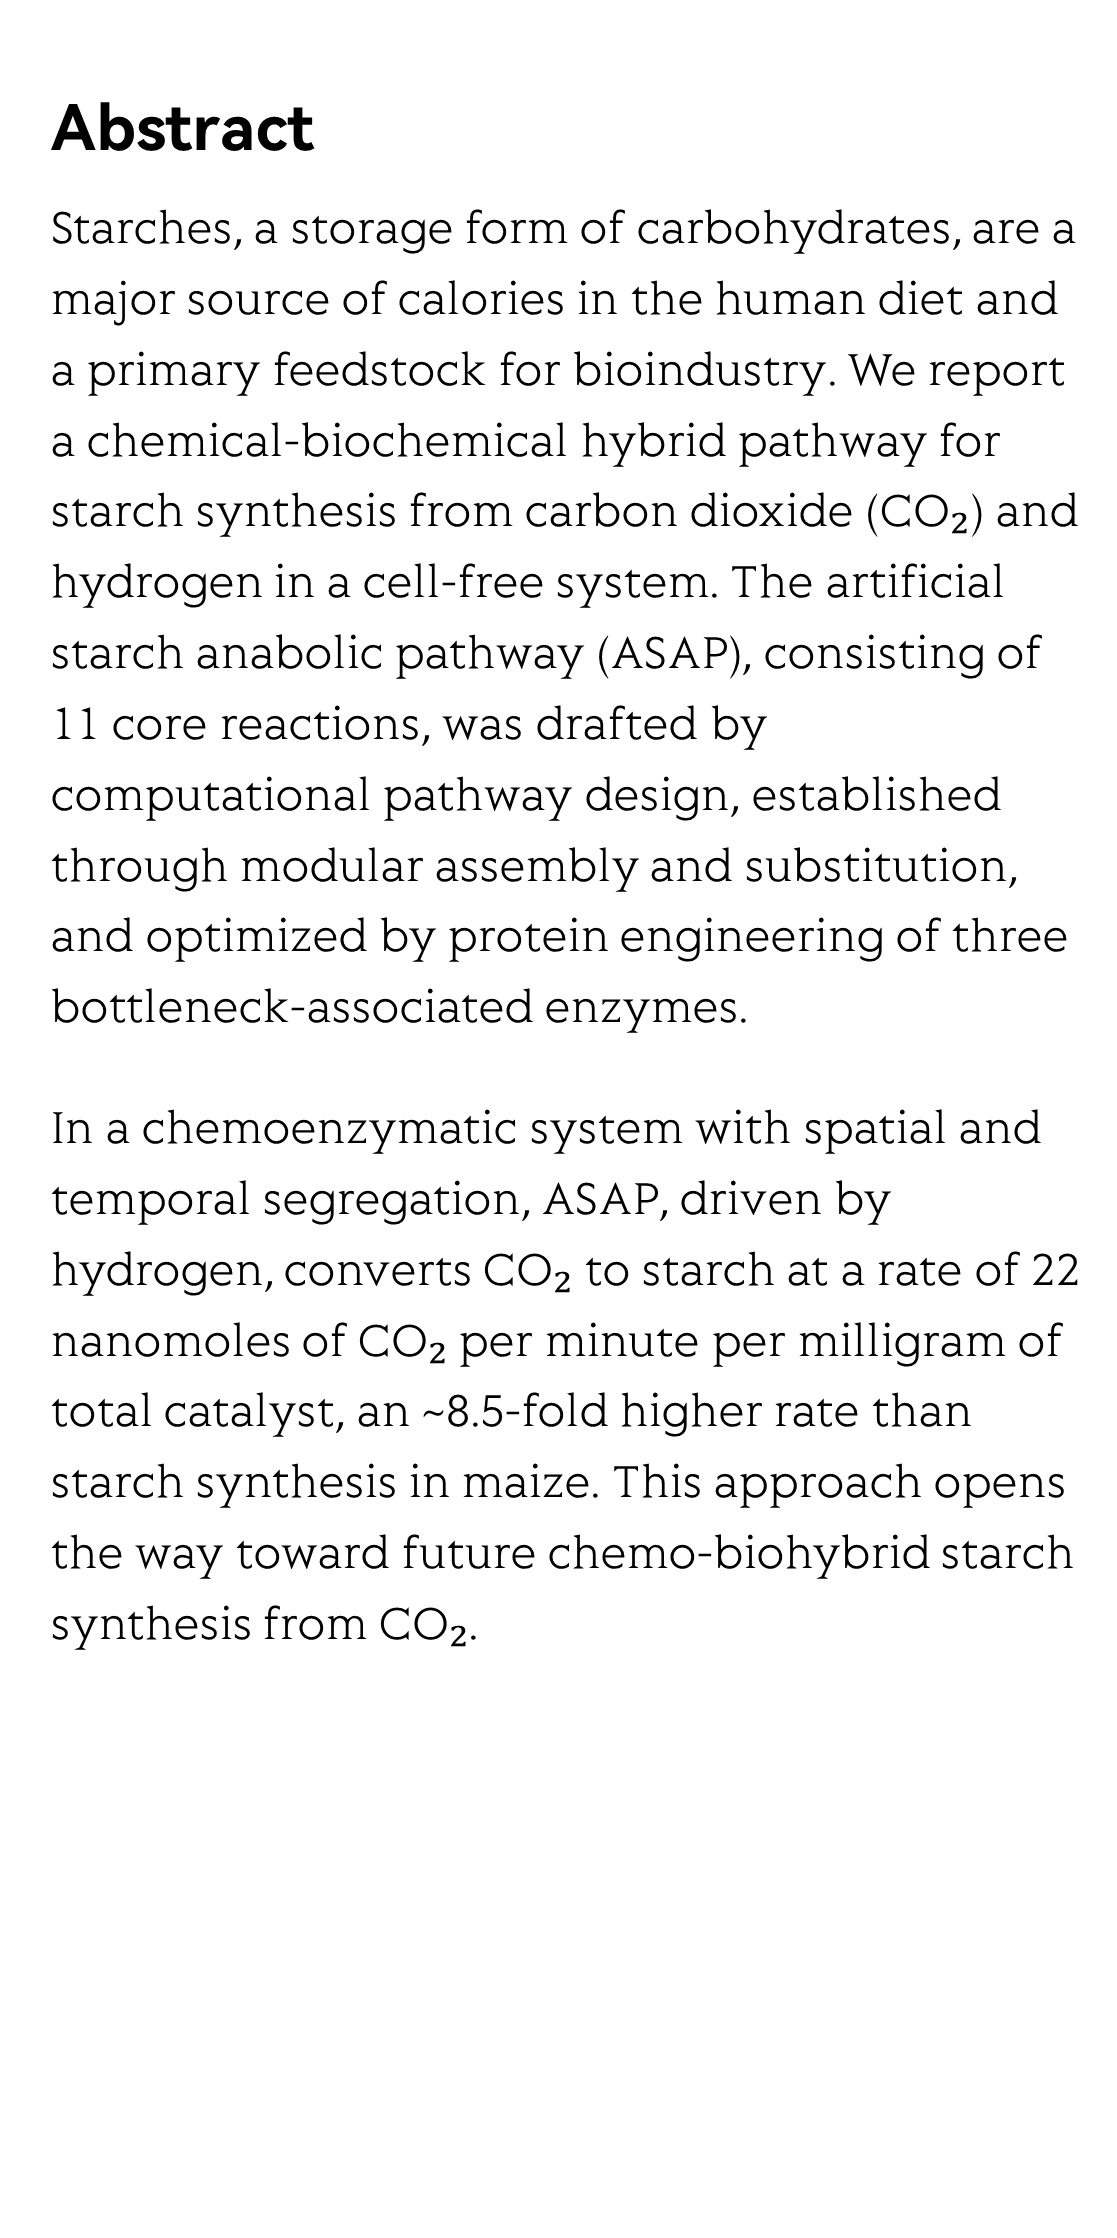 Cell-free chemoenzymatic starch synthesis from carbon dioxide_2